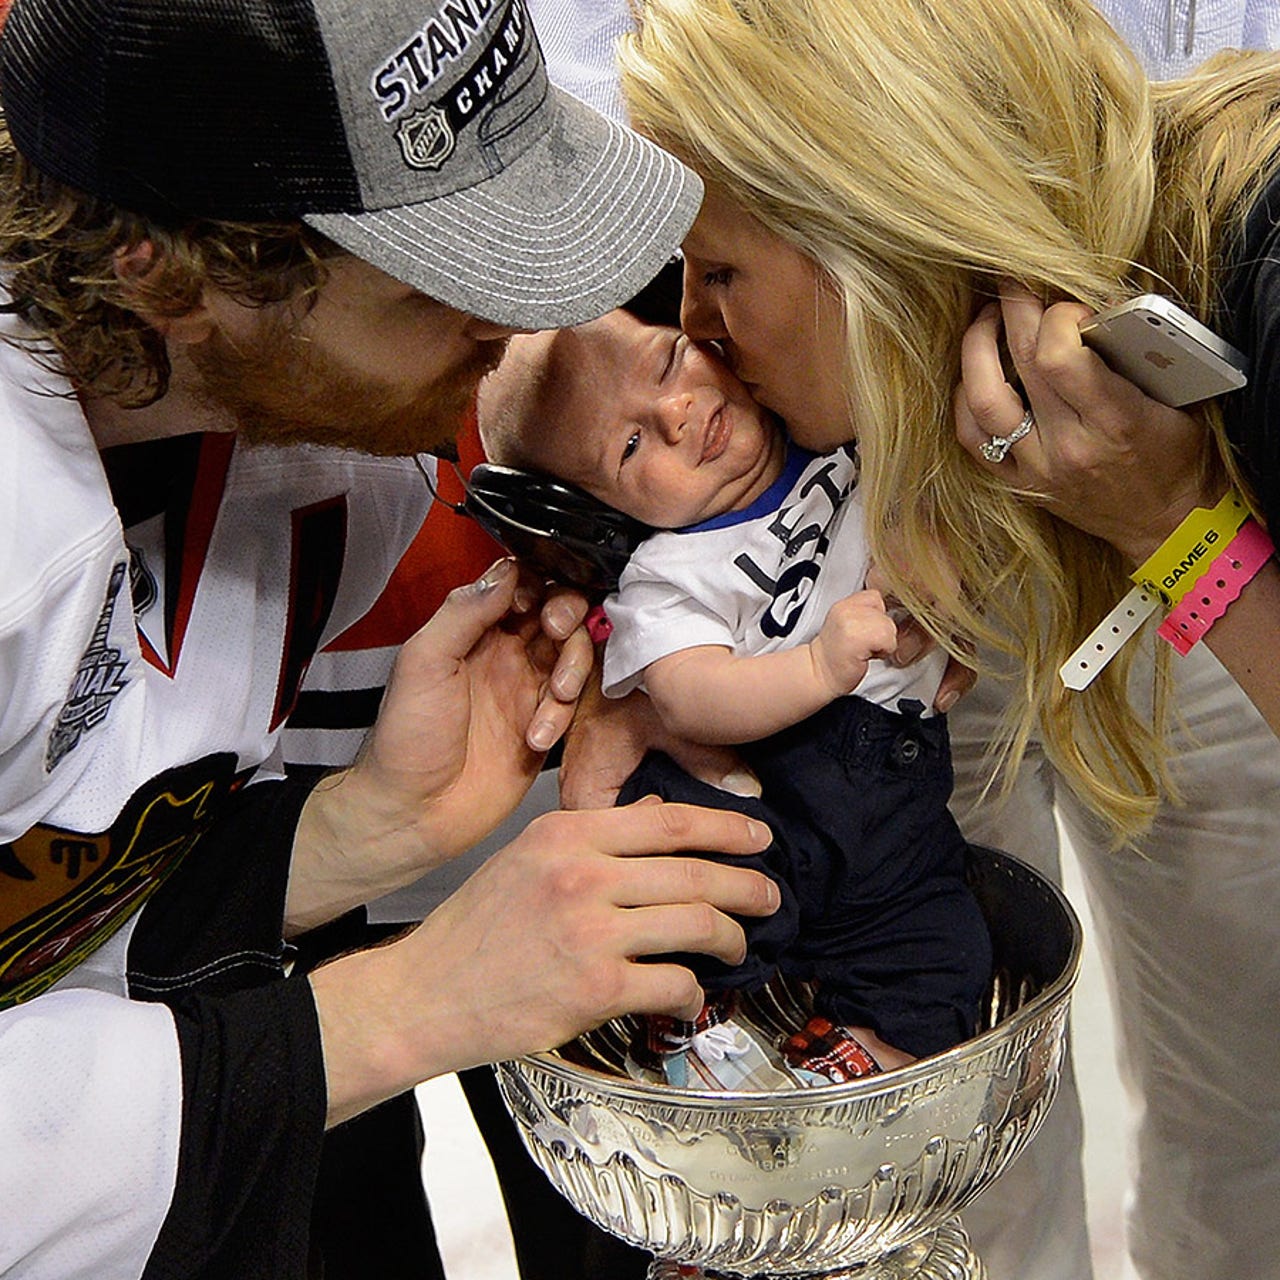 https://a57.foxsports.com/statics.foxsports.com/www.foxsports.com/content/uploads/2020/03/1280/1280/duncan-keith-baby-stanley-cup.jpg?ve=1&tl=1